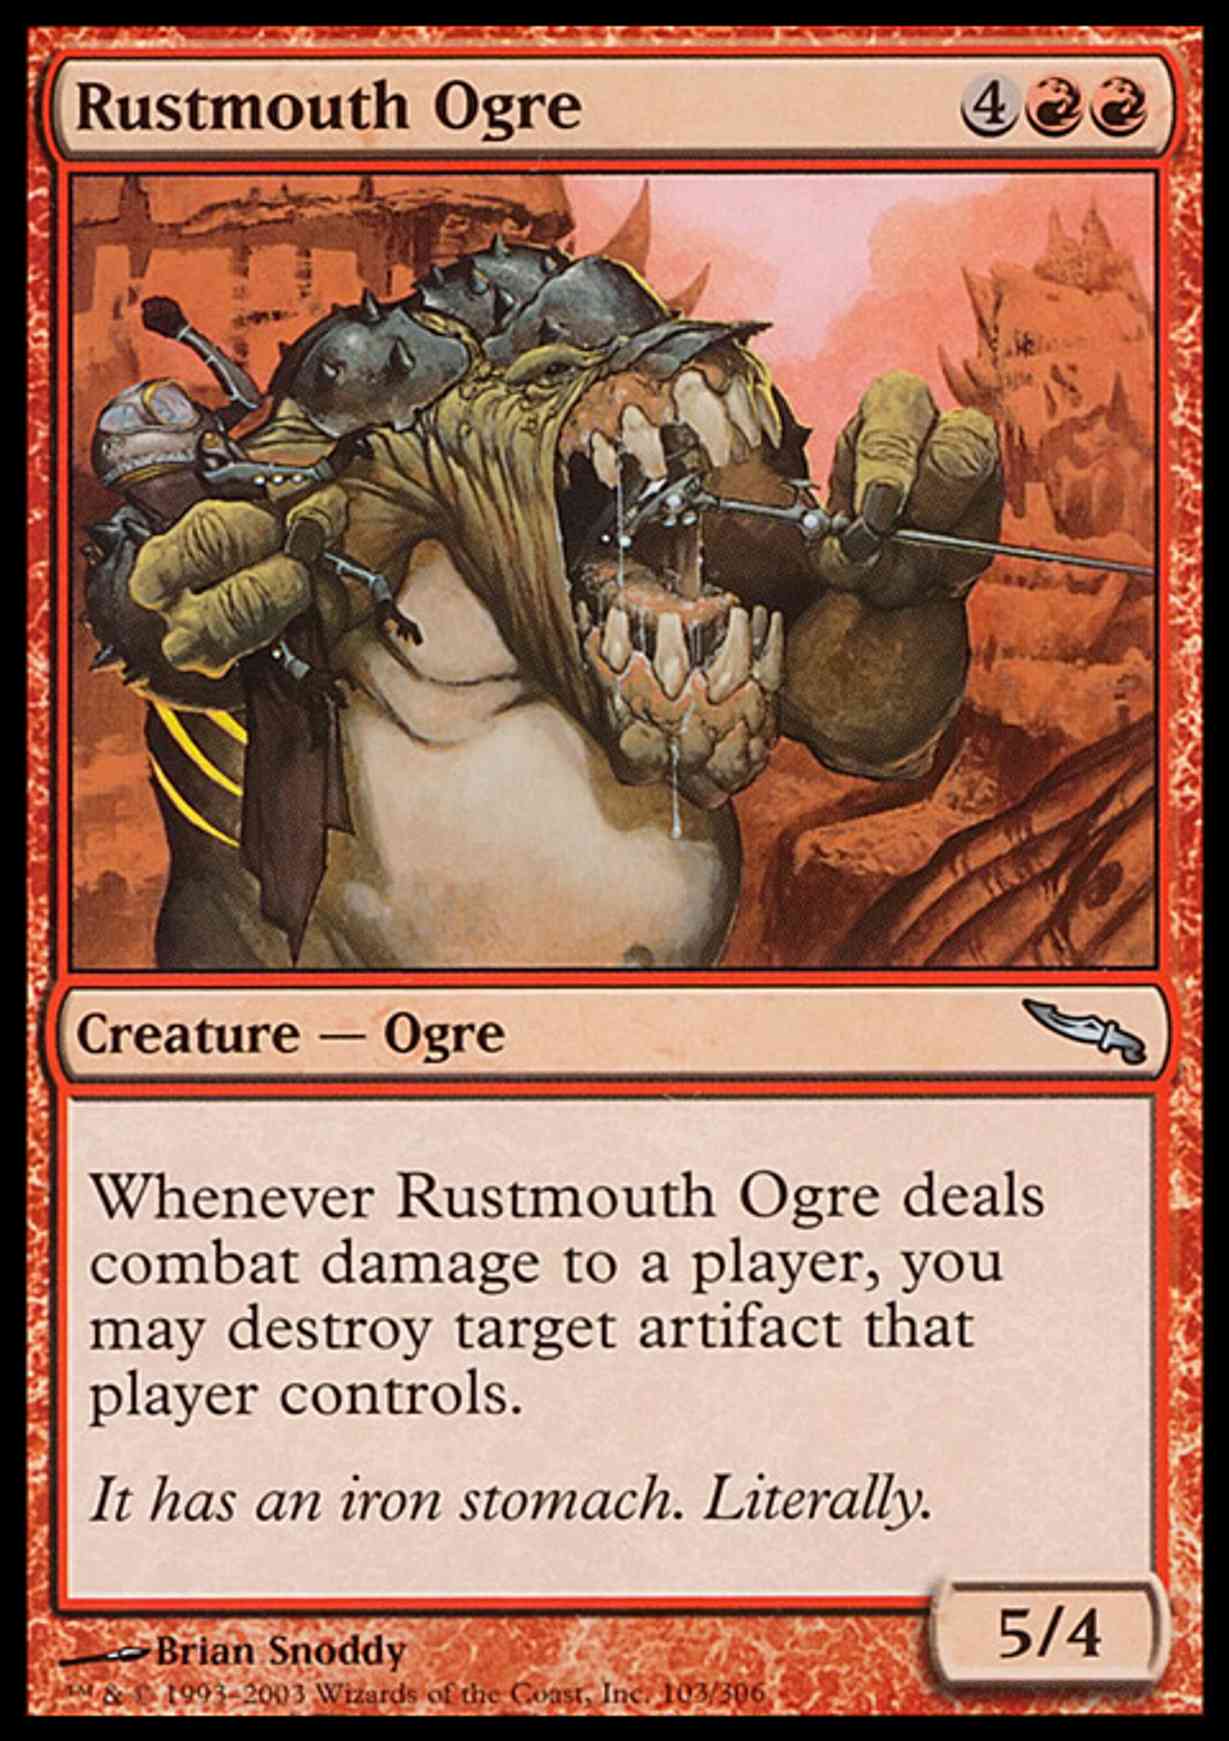 Rustmouth Ogre magic card front